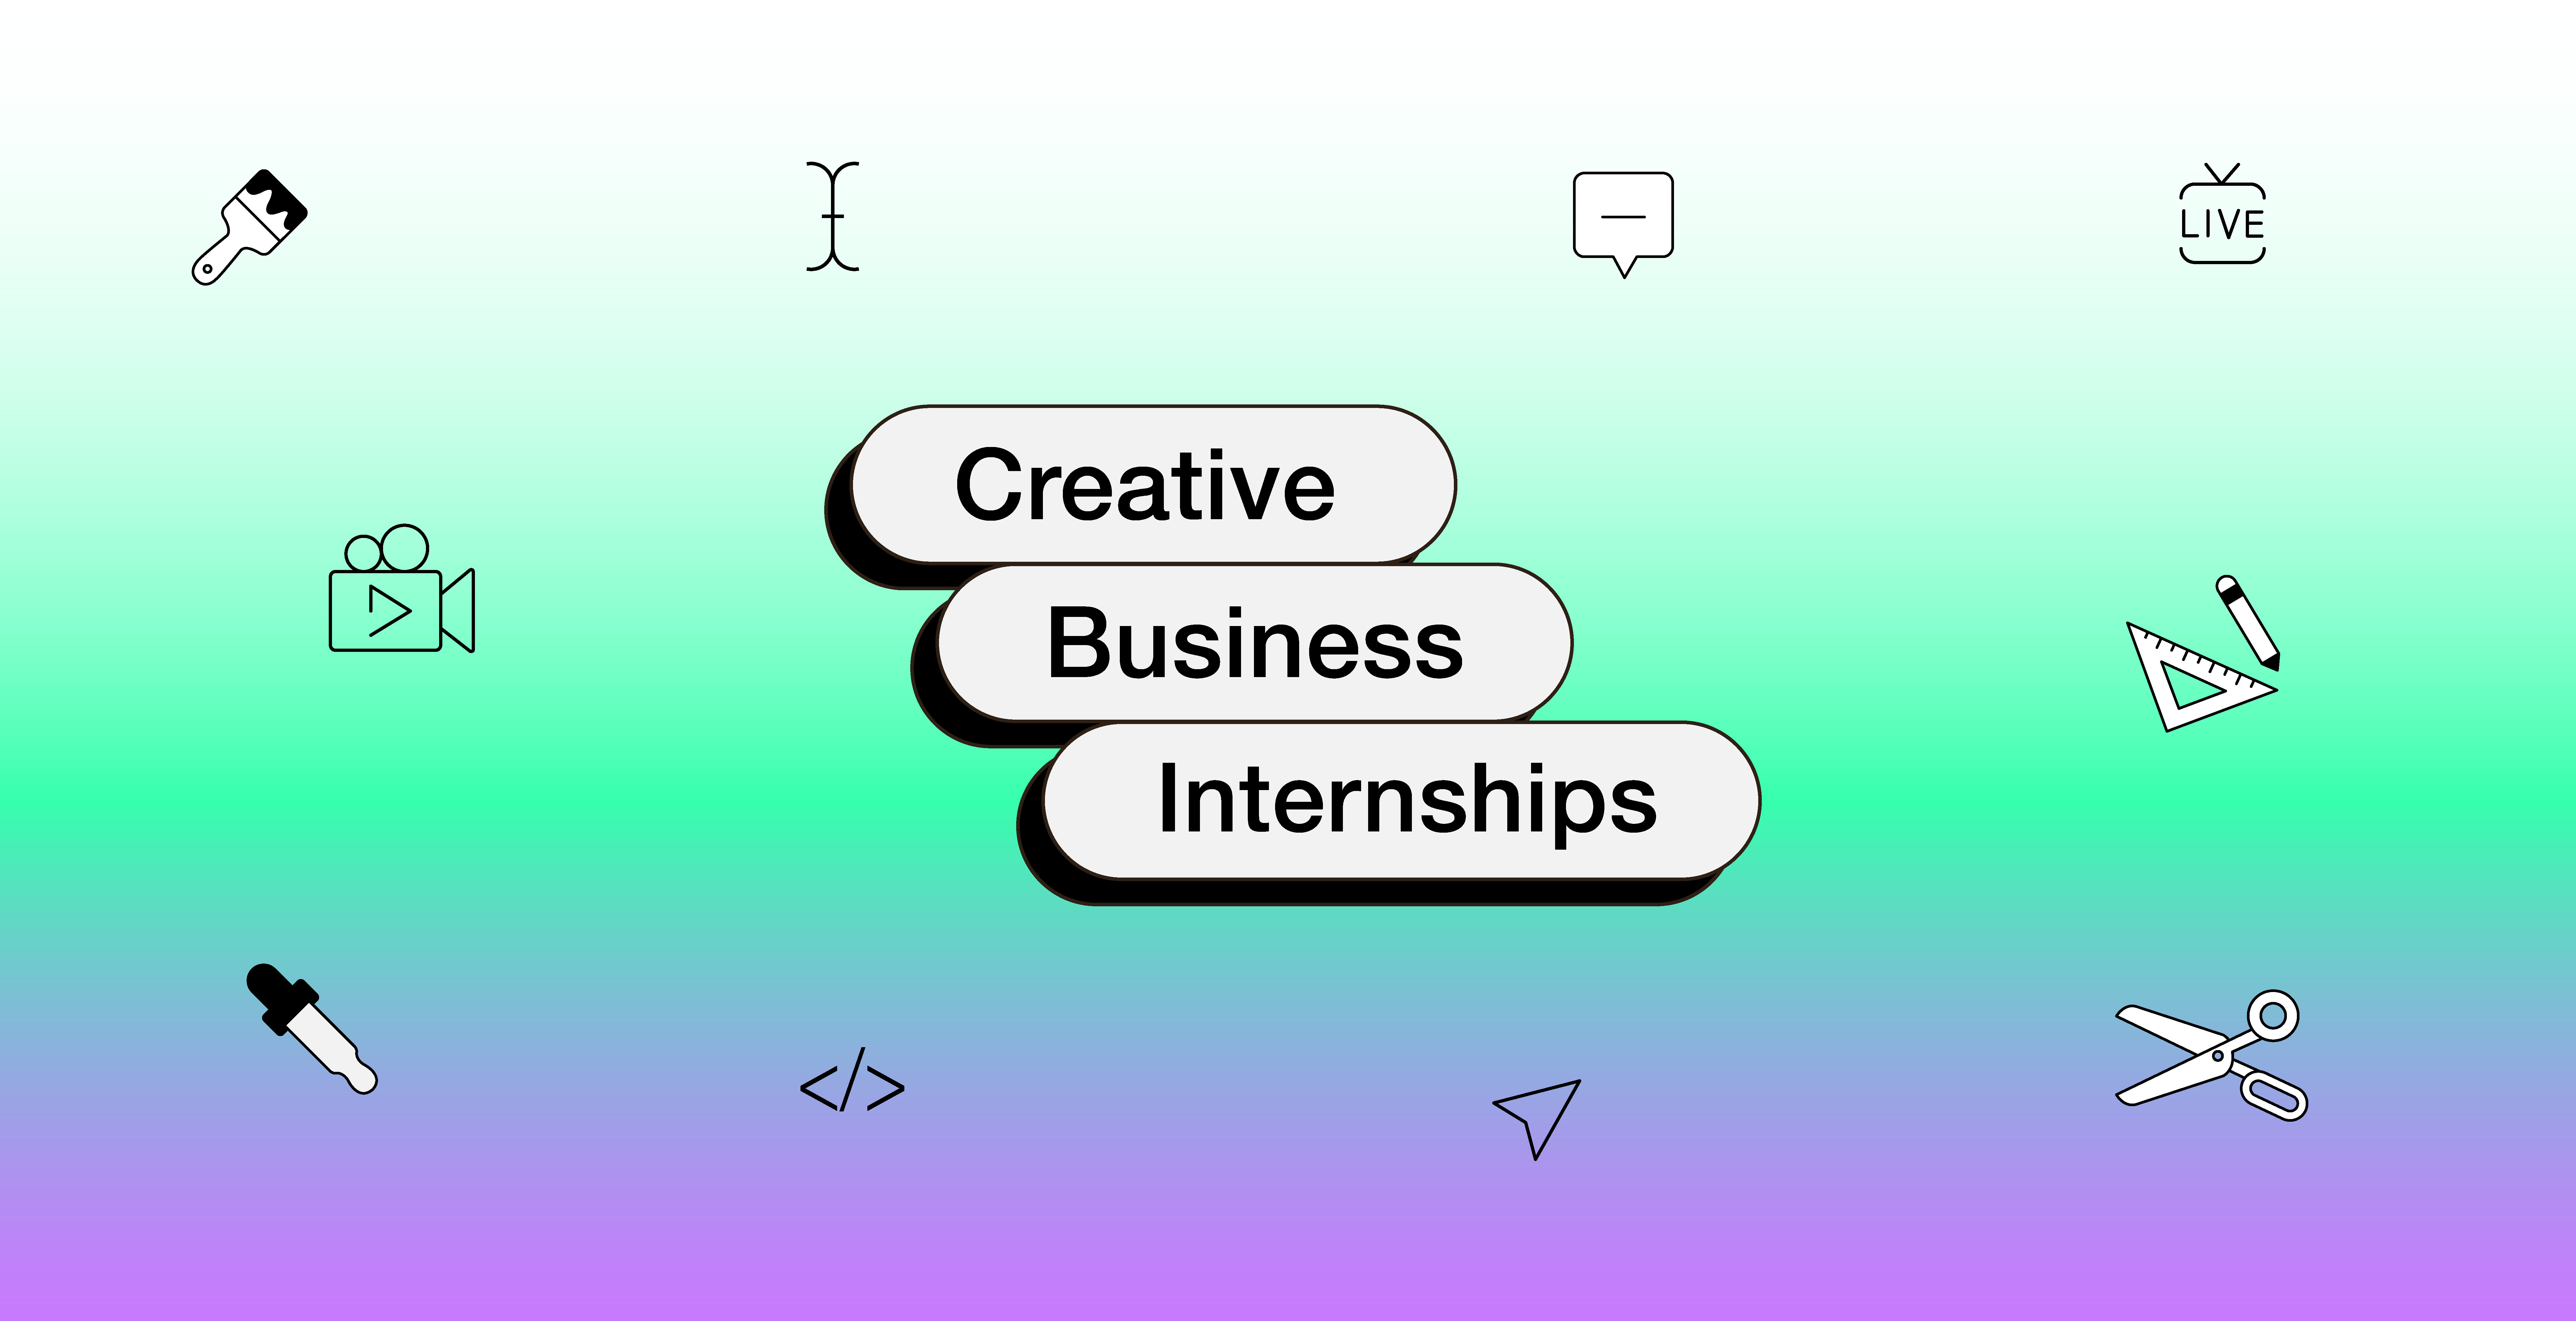 Creative Business Internships – How to apply